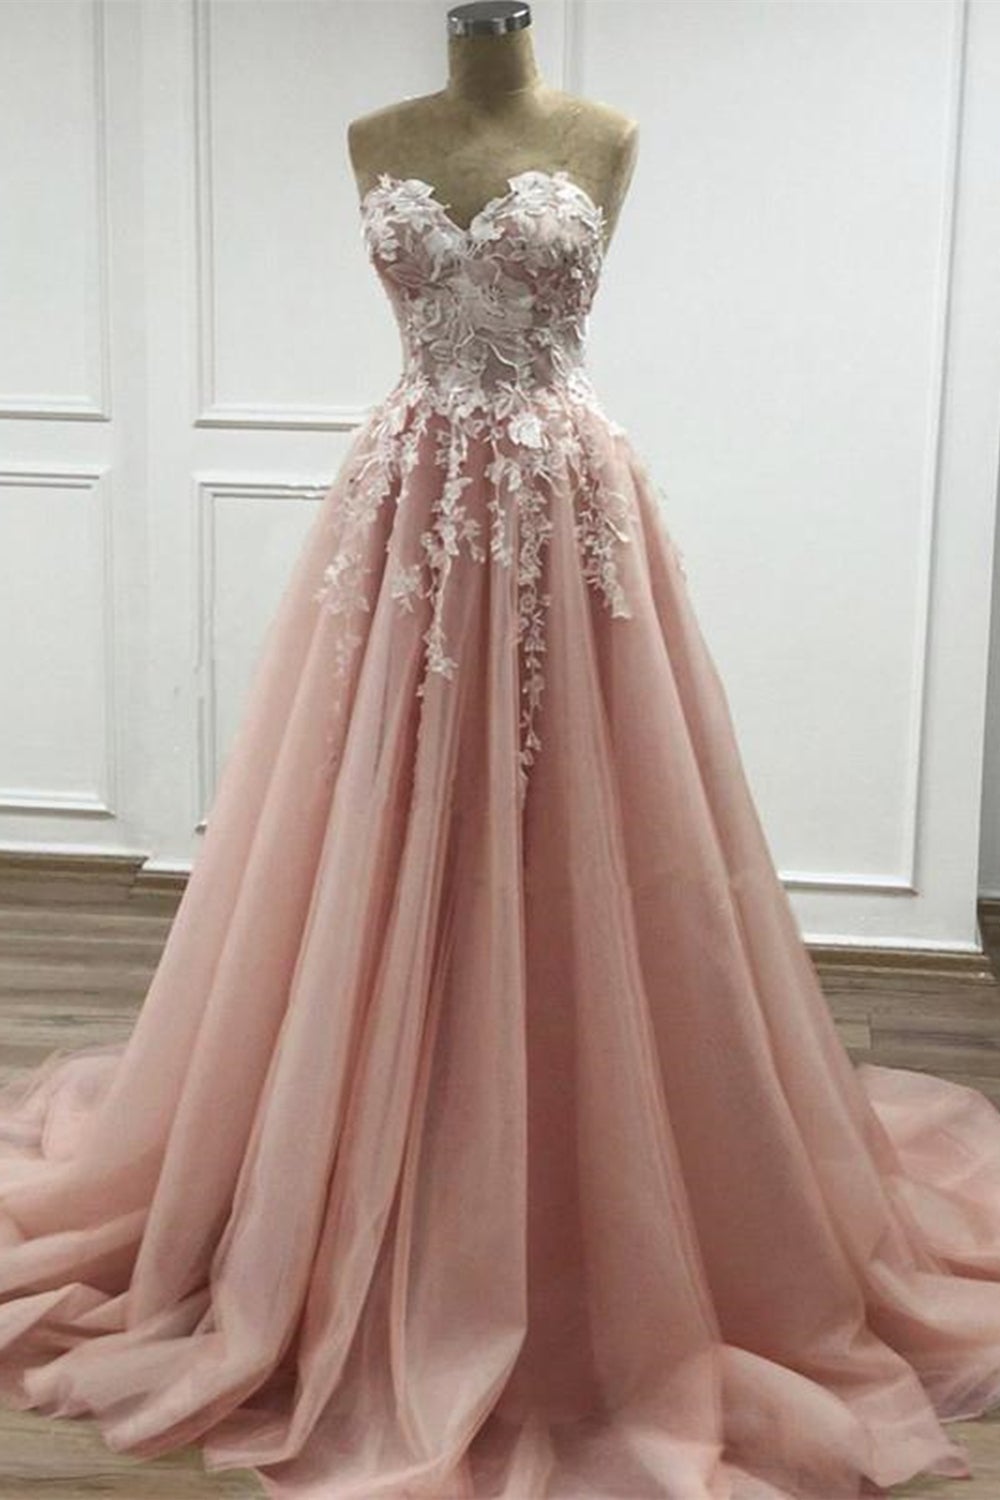 Strapless Sweetheart Neck Pink Lace Appliques Long Prom Dress Outfits For Girls,Floral Formal Dress Outfits For Girls,Fashion Evening Dresses